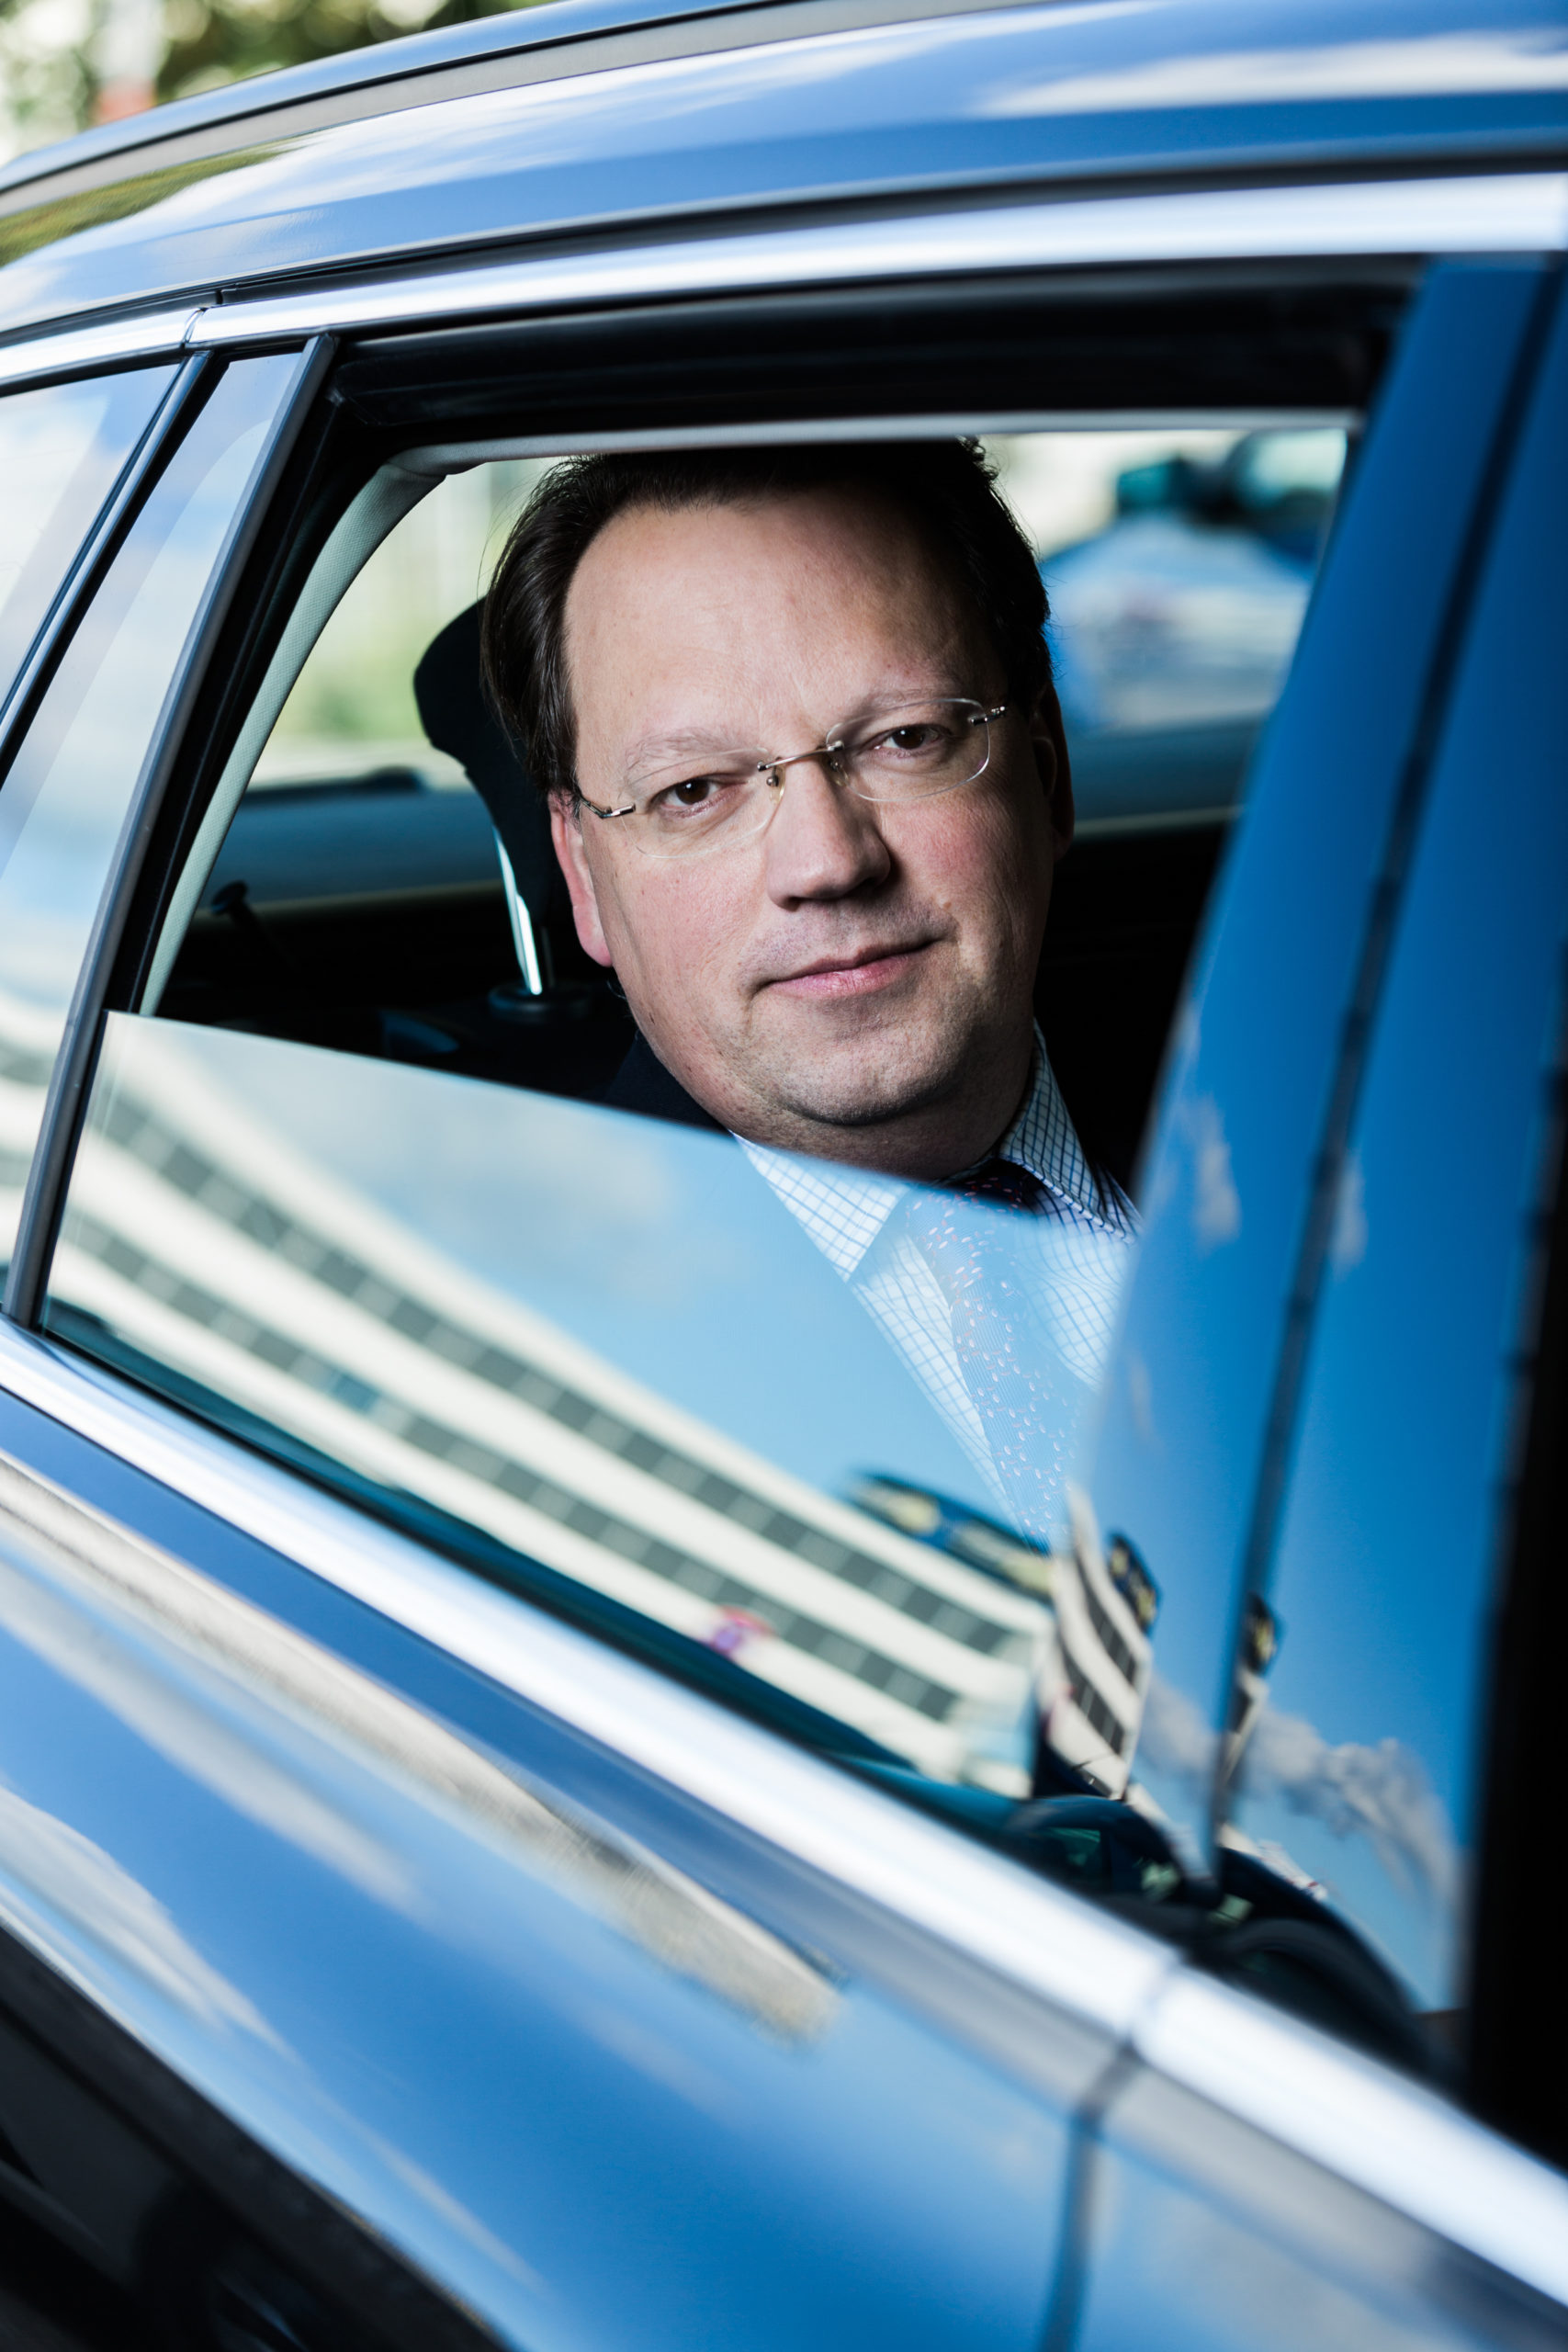 Corporate portrait of a guy in a car